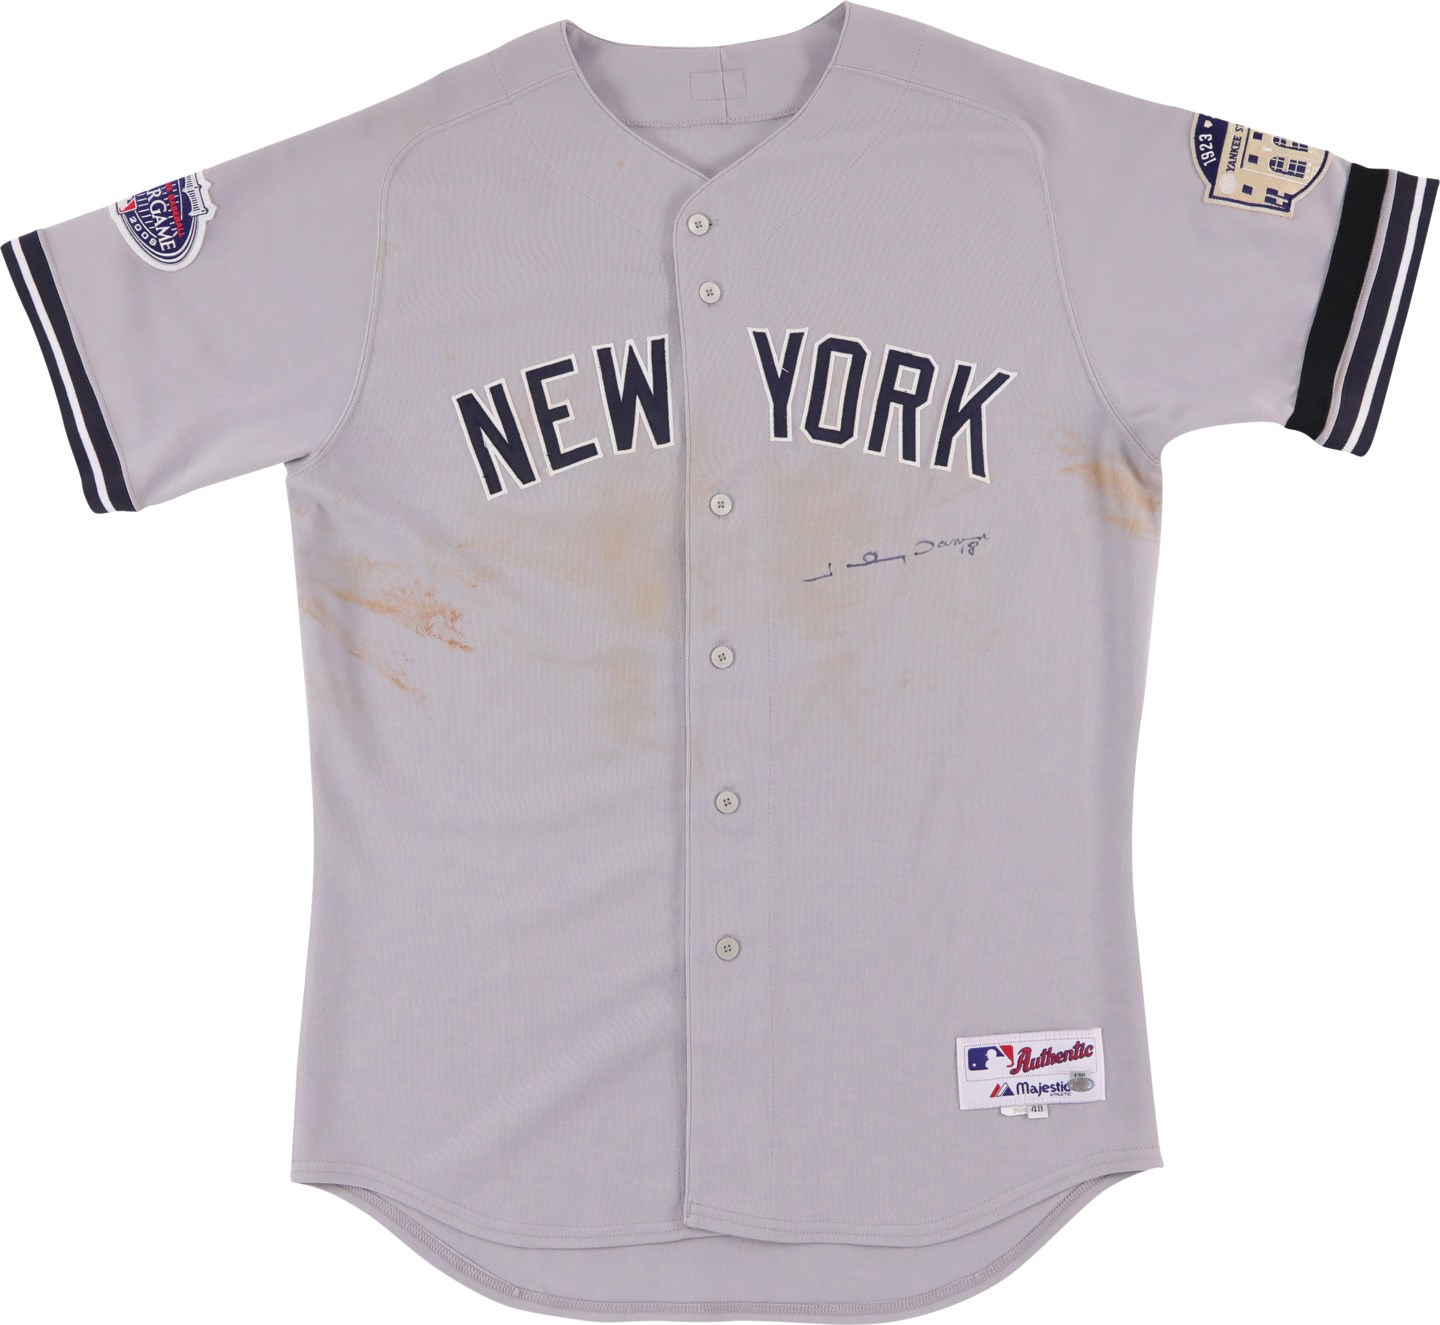 2008 Johnny Damon Unwashed "Two-Home Run" New York Yankees Signed Game Worn Jersey (Photo-Matched to Three Games & Steiner)